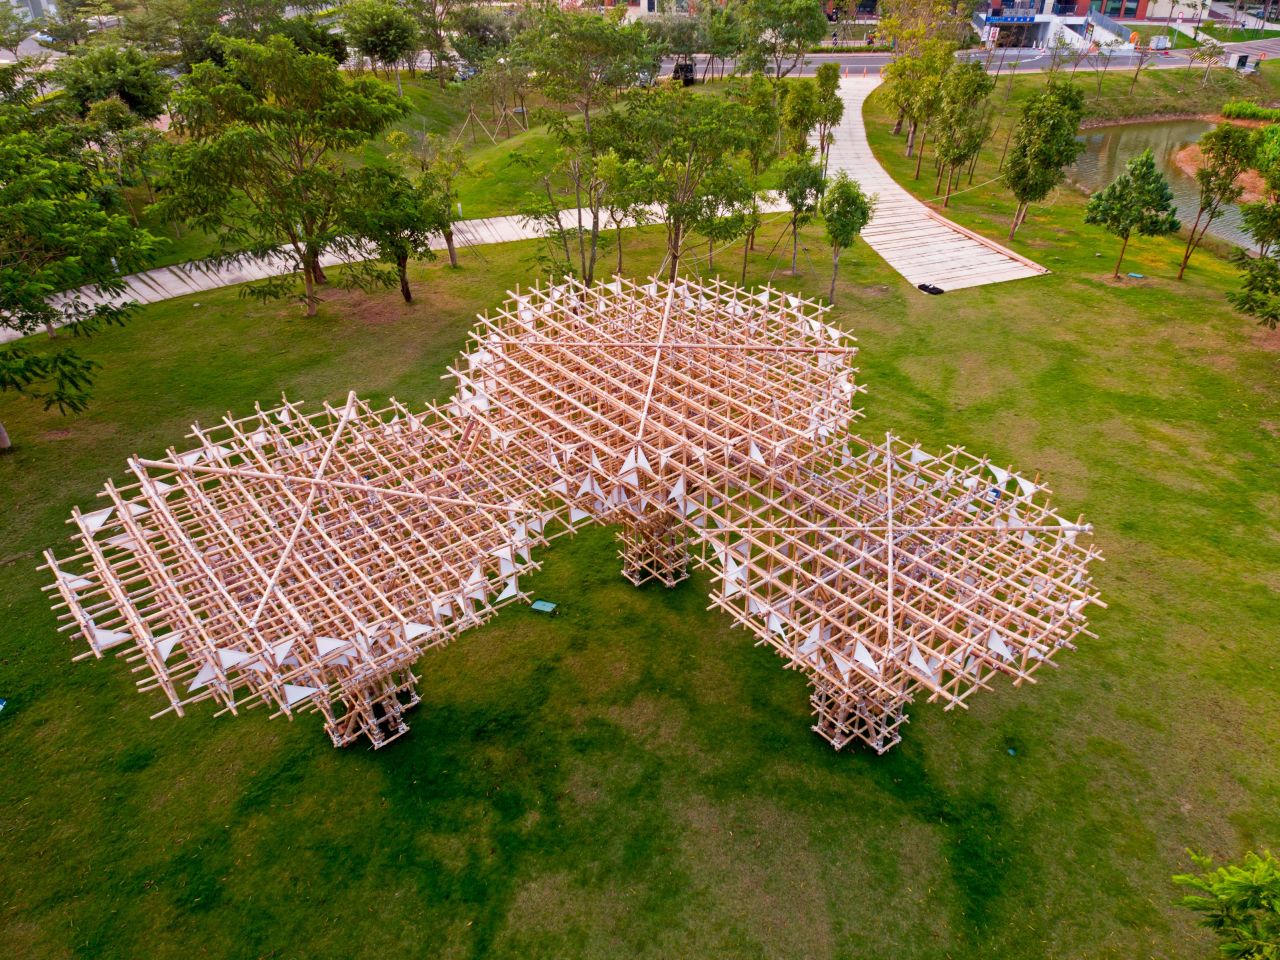 In 2015, the architects built an outdoor pavilion titled "Treeplets" at Macao University.